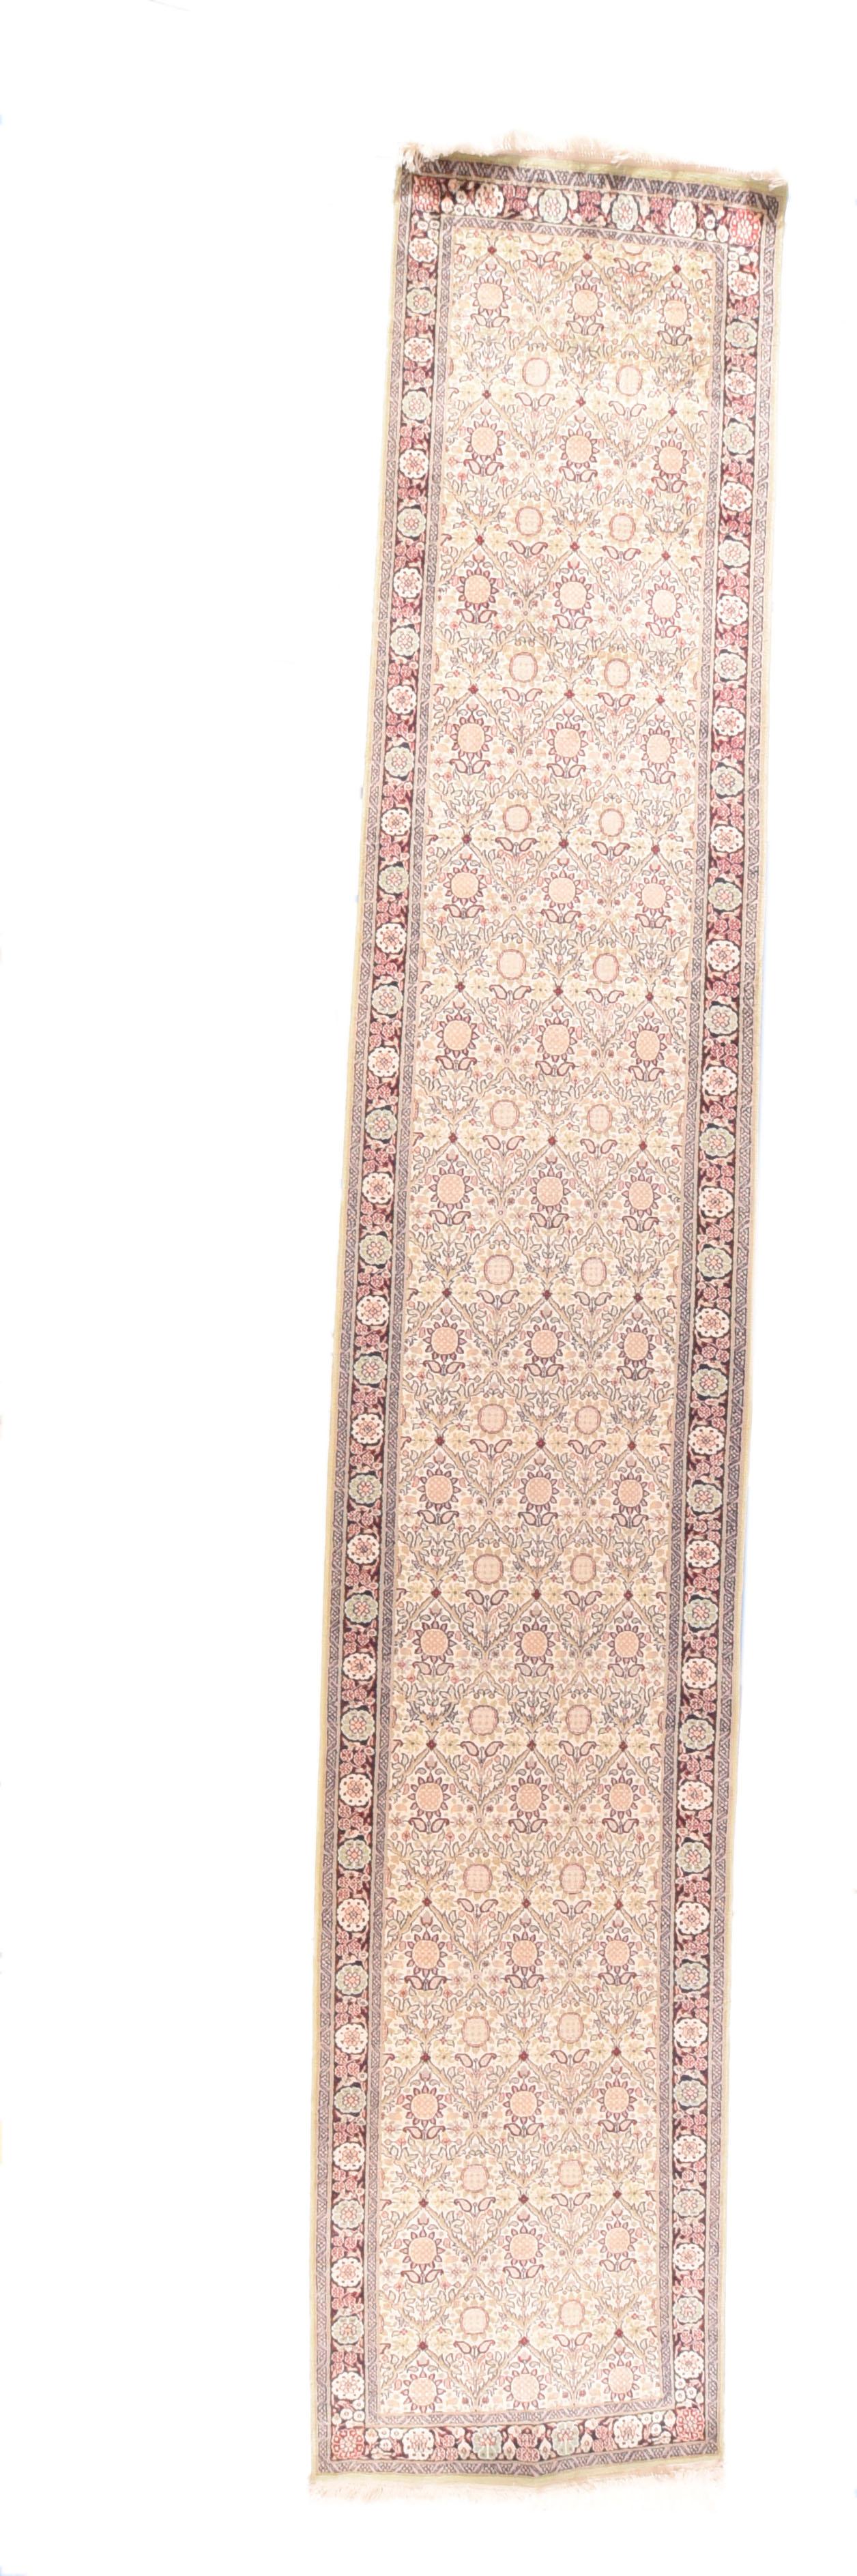 Vintage Indian Cashmere Runner 2'7'' x 14'10'' In Good Condition For Sale In New York, NY